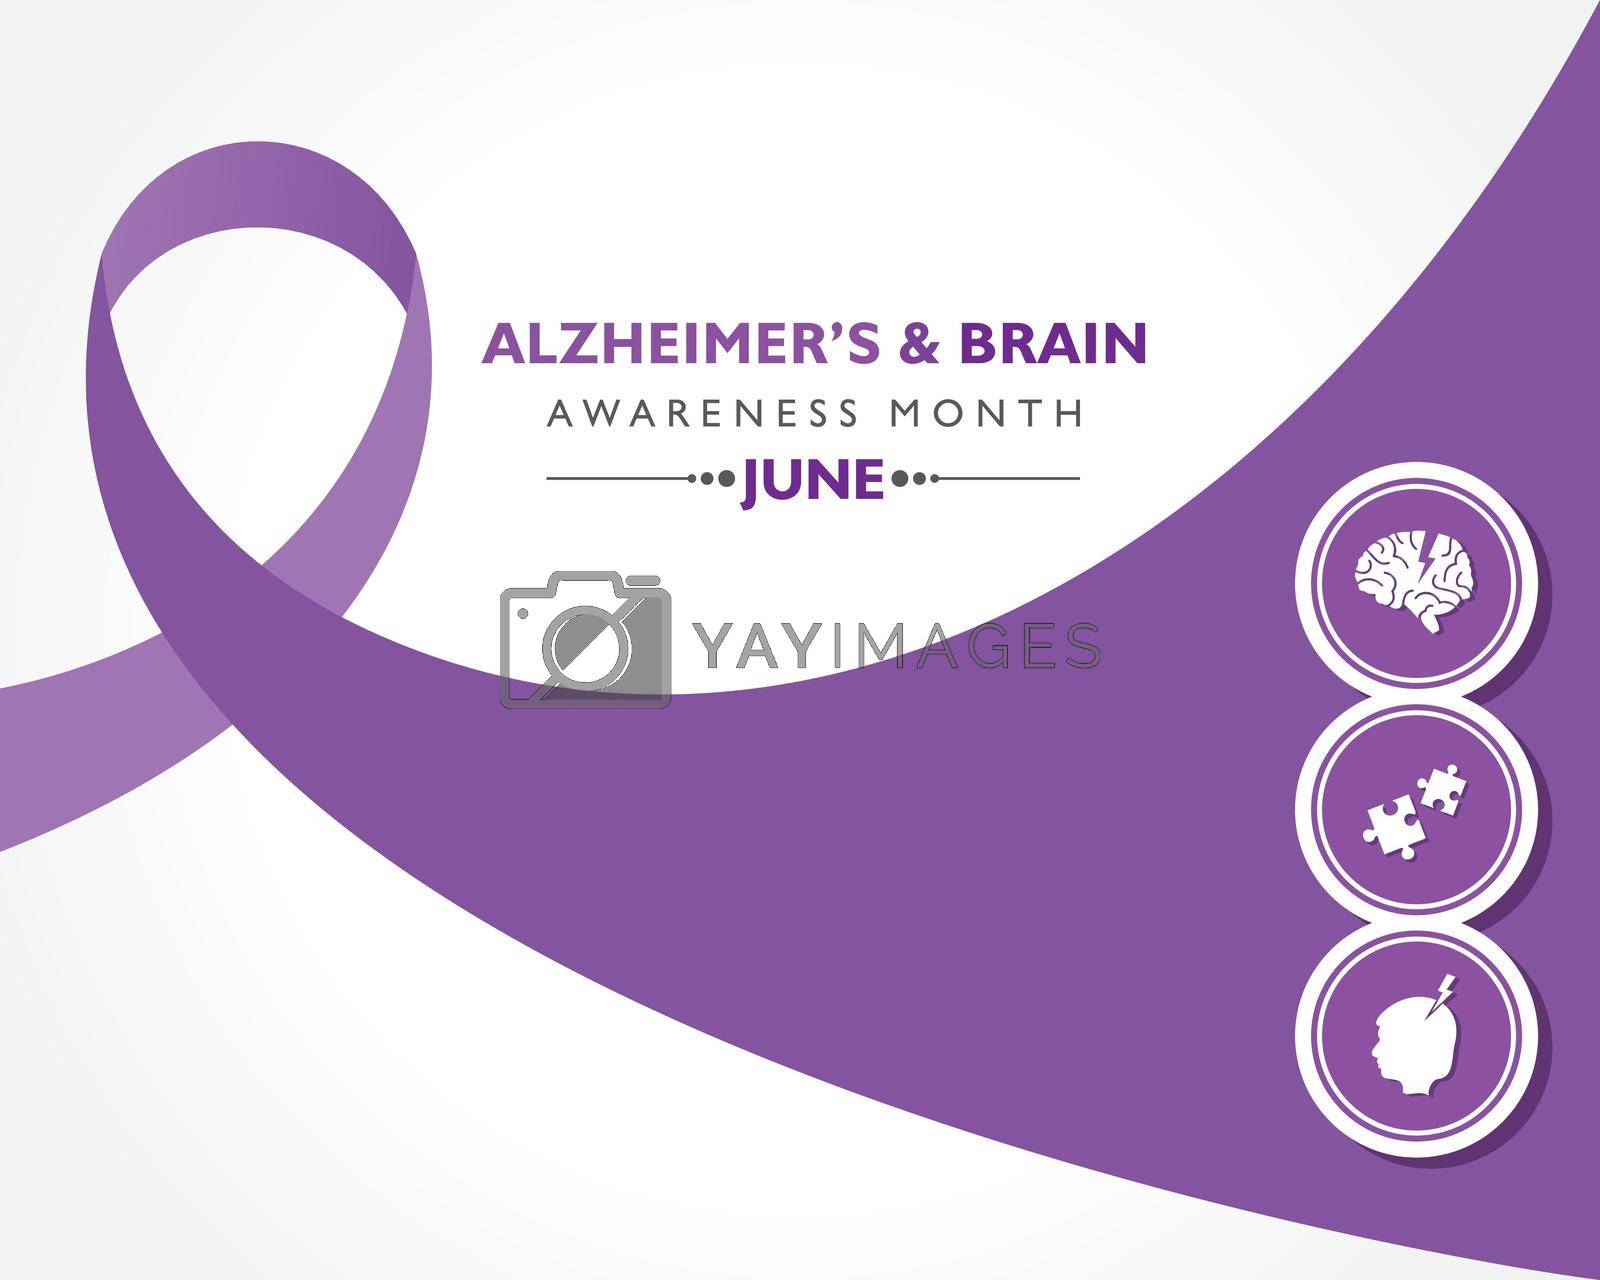 Royalty free image of Vector Illustration of Alzheimer's and Brain Awareness Month observed in June. by graphicsdunia4you